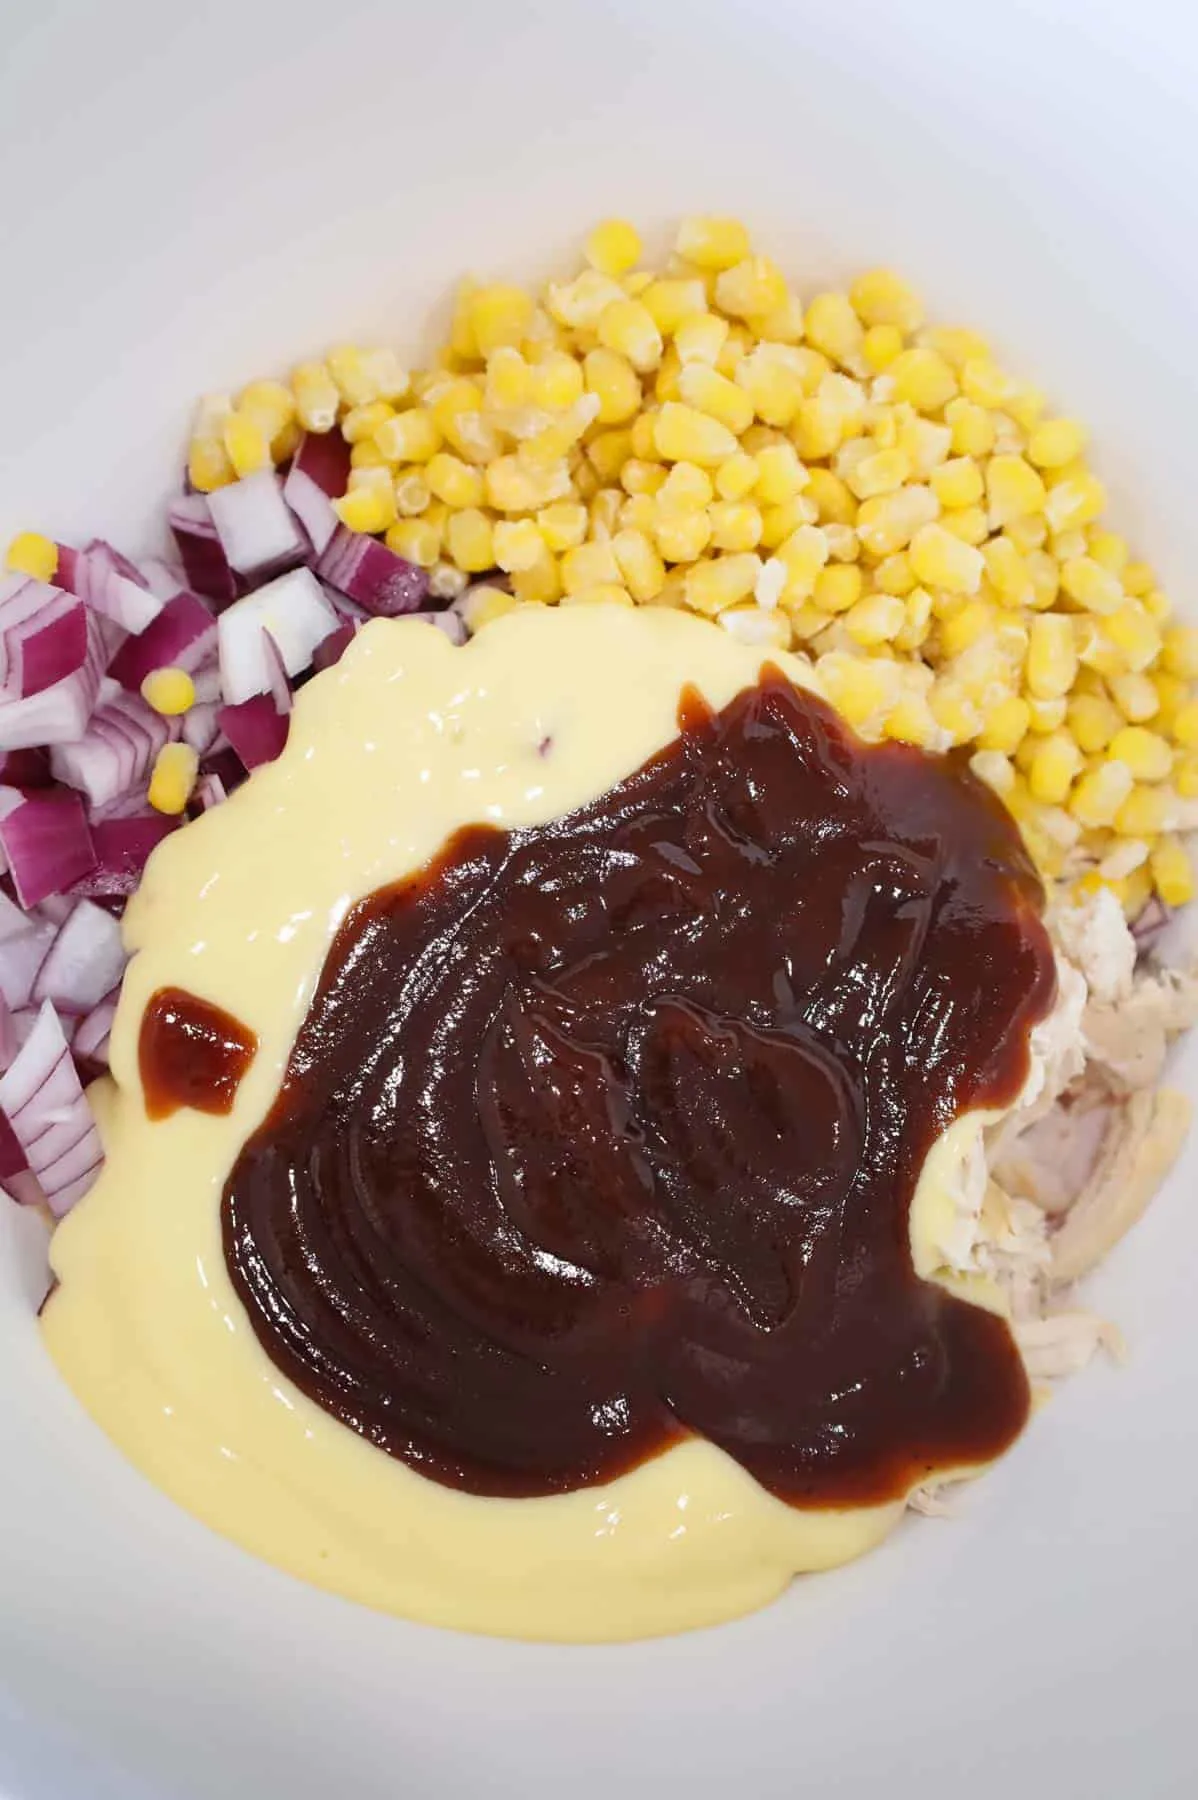 barbecue sauce, cream of chicken soup, diced red onions, corn and shredded chicken in a bowl